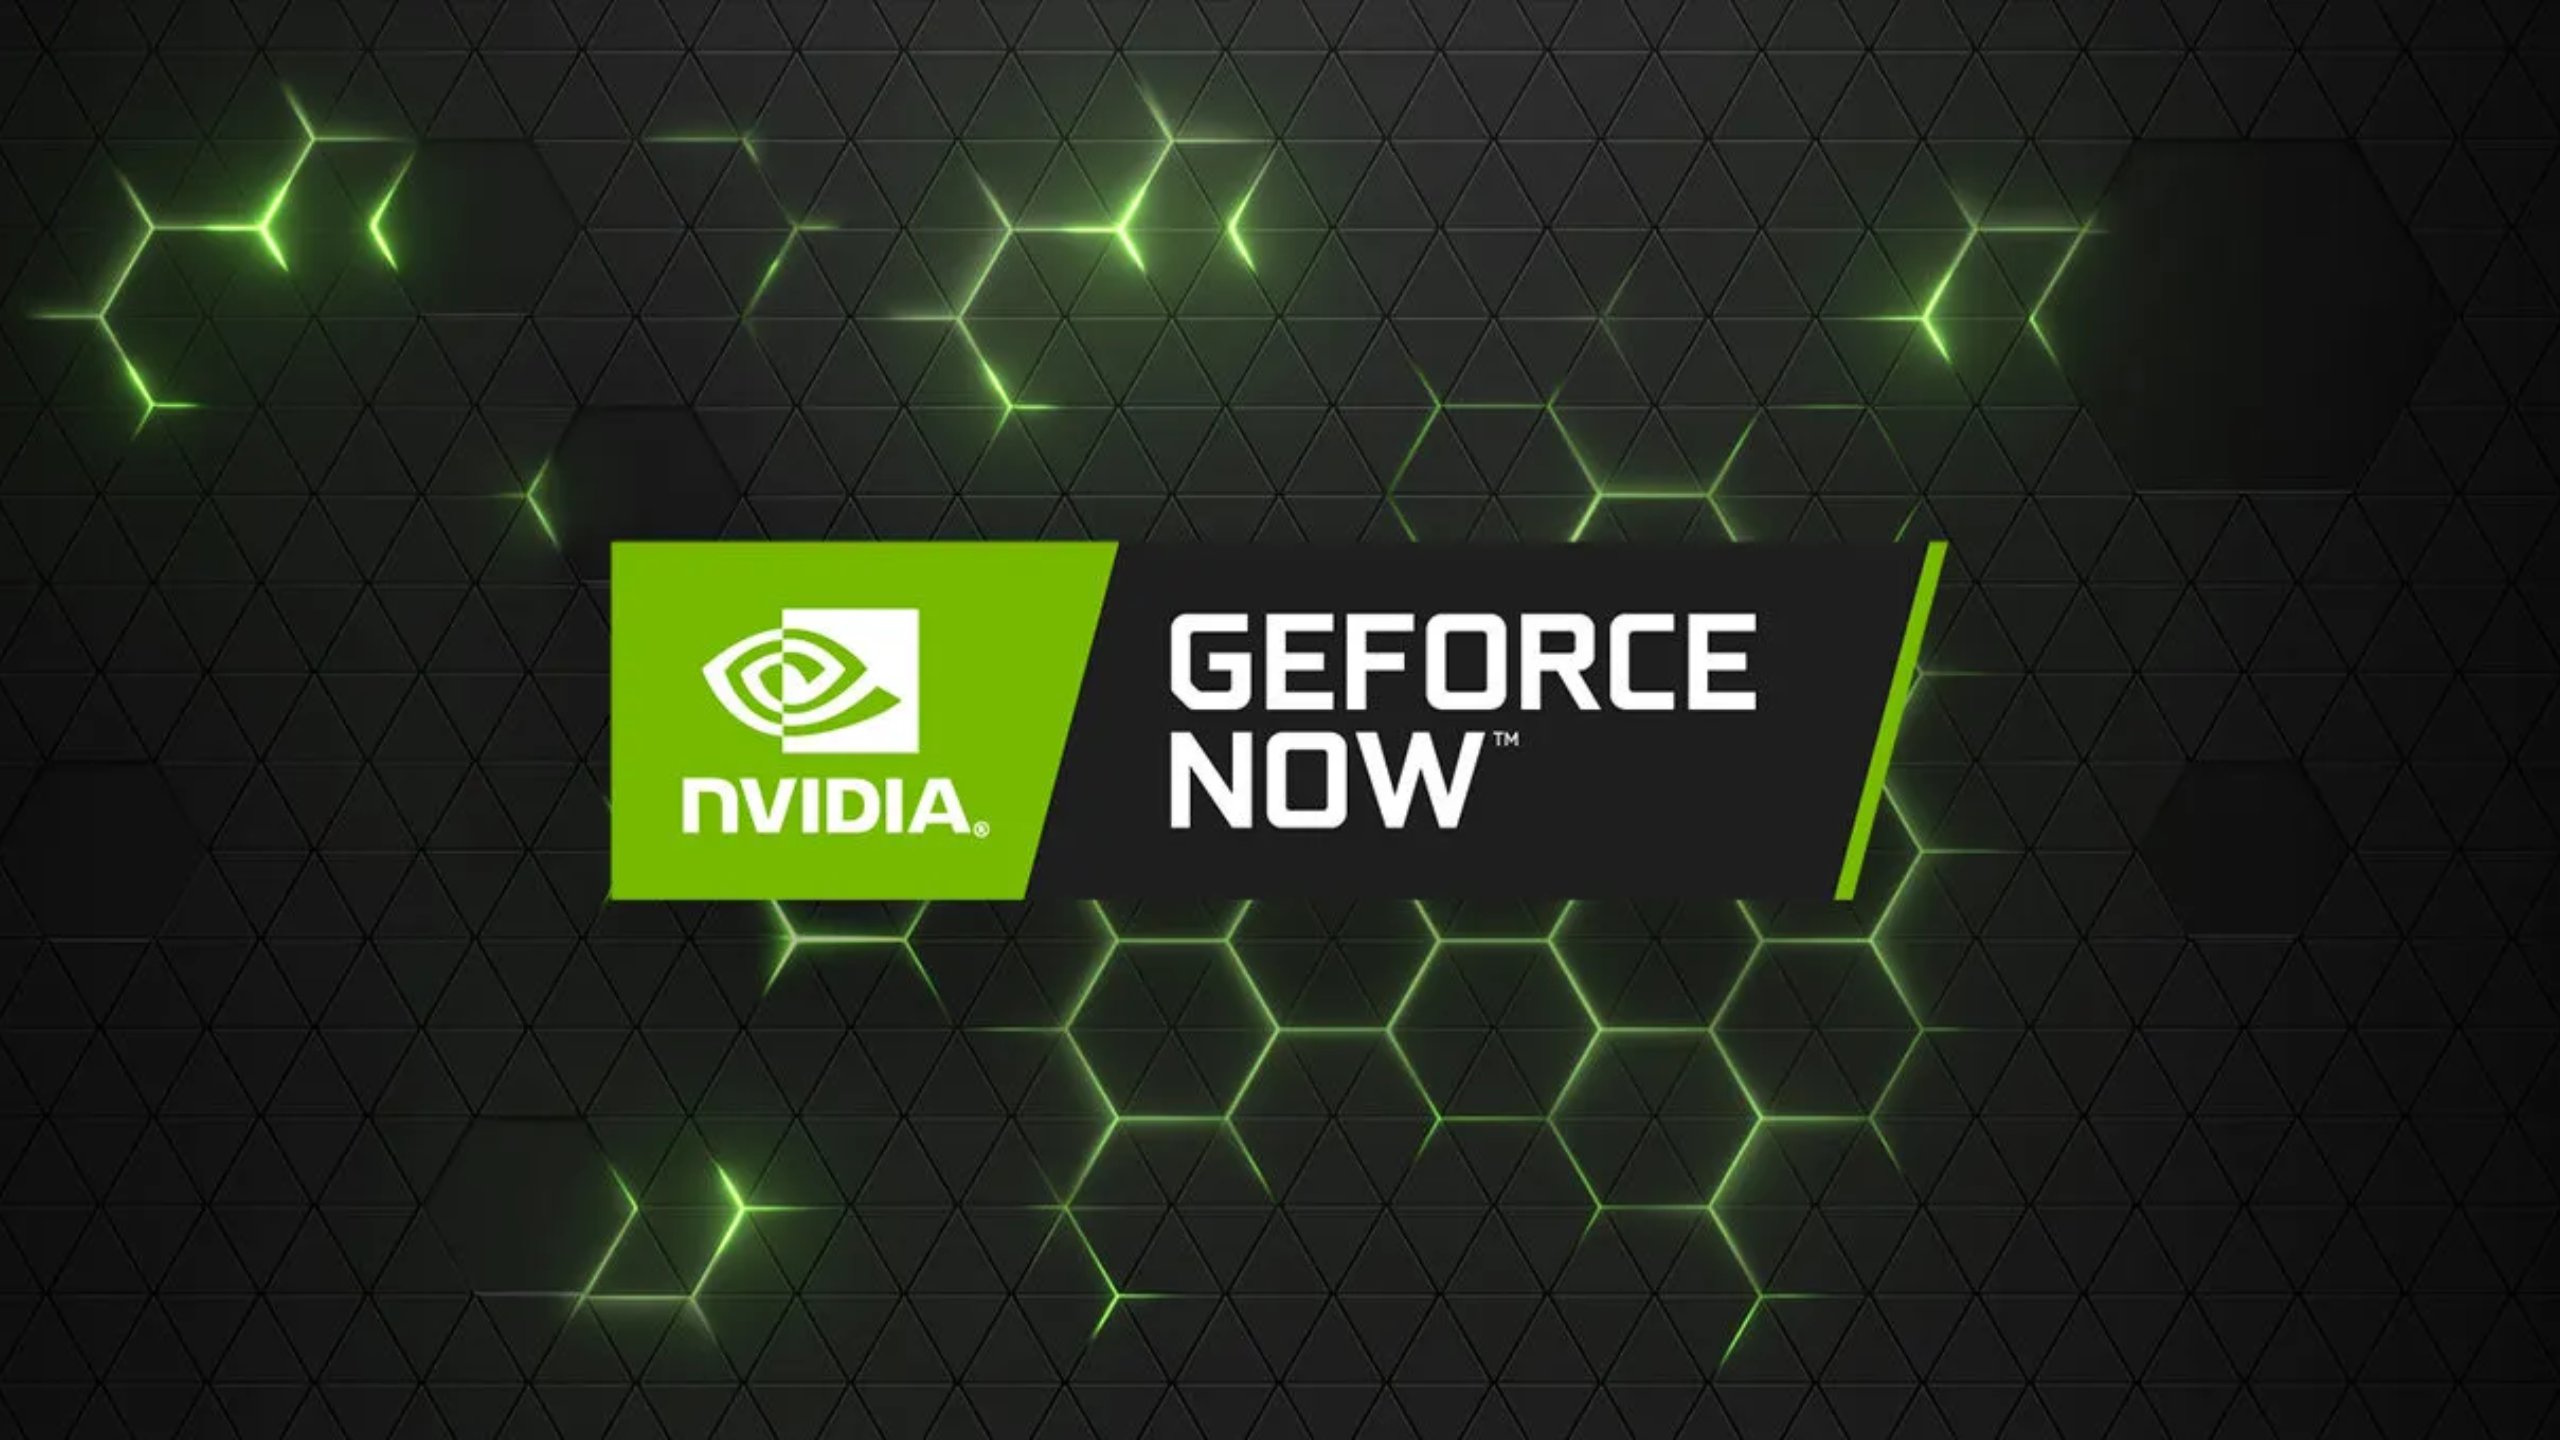 Nvidias New Geforce Cloud Allow iOS Users to Access Fortnite